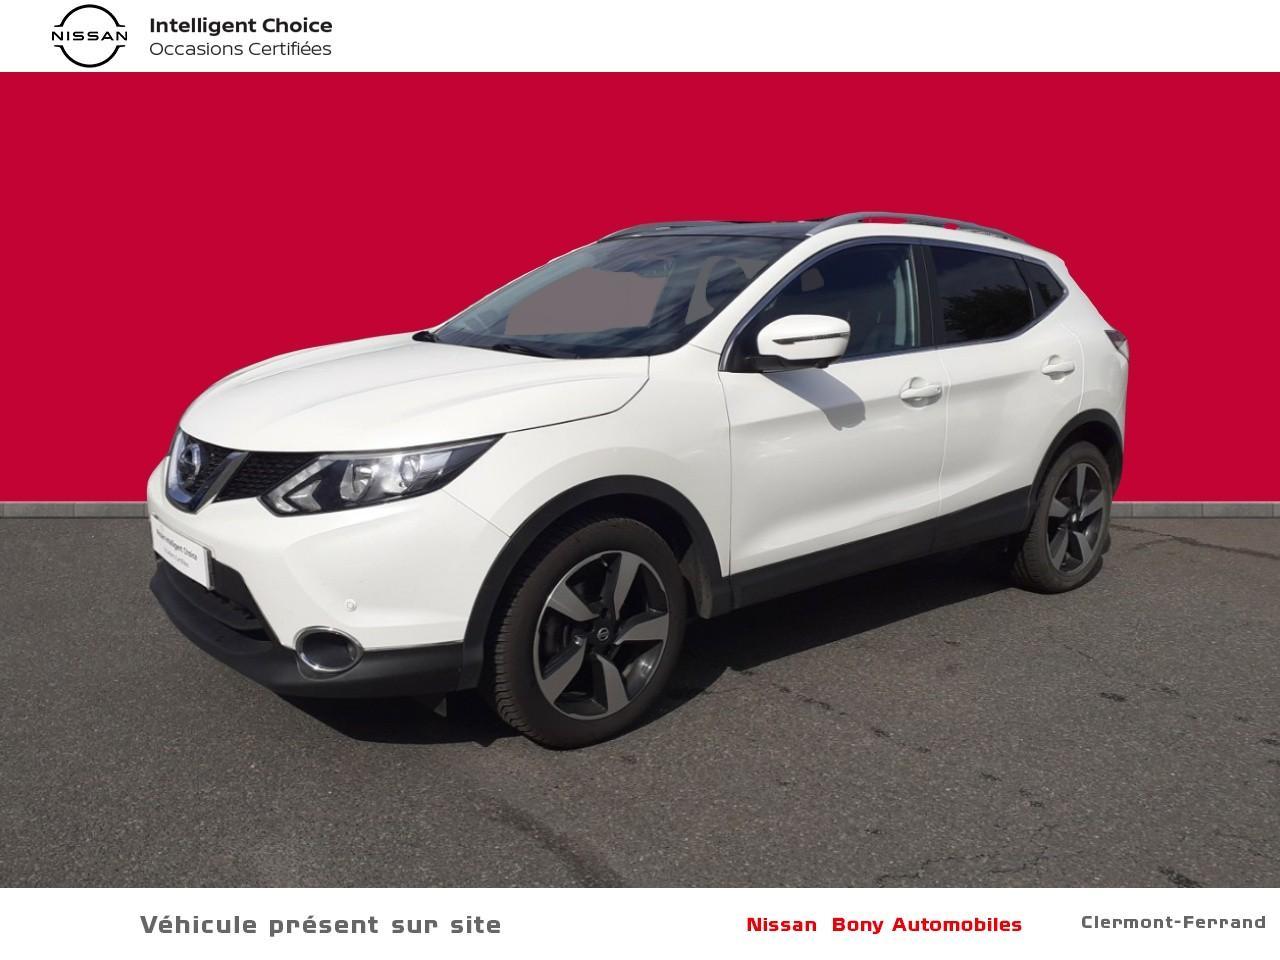 Nissan Qashqai 1.2 DIG-T 115 STOP/START CONNECT EDITION XTRONIC A